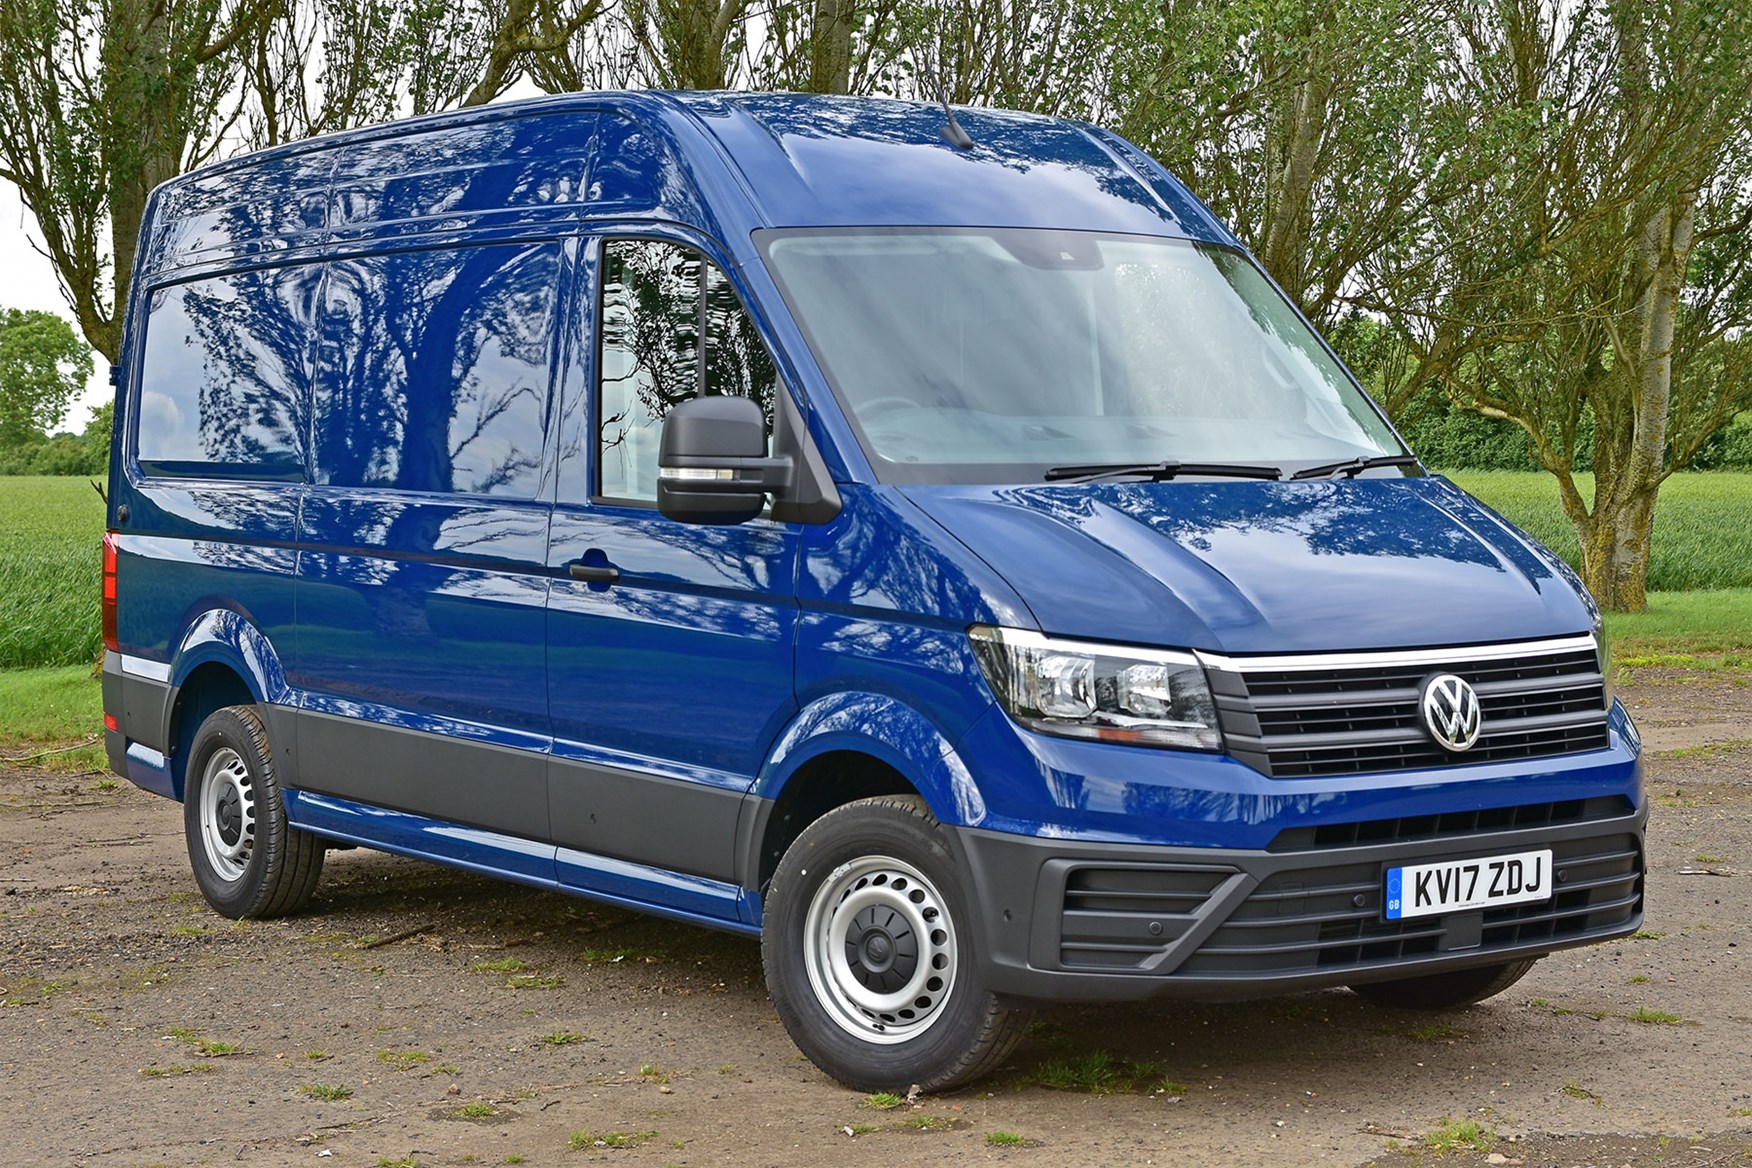 VW Crafter FWD review - front view, blue